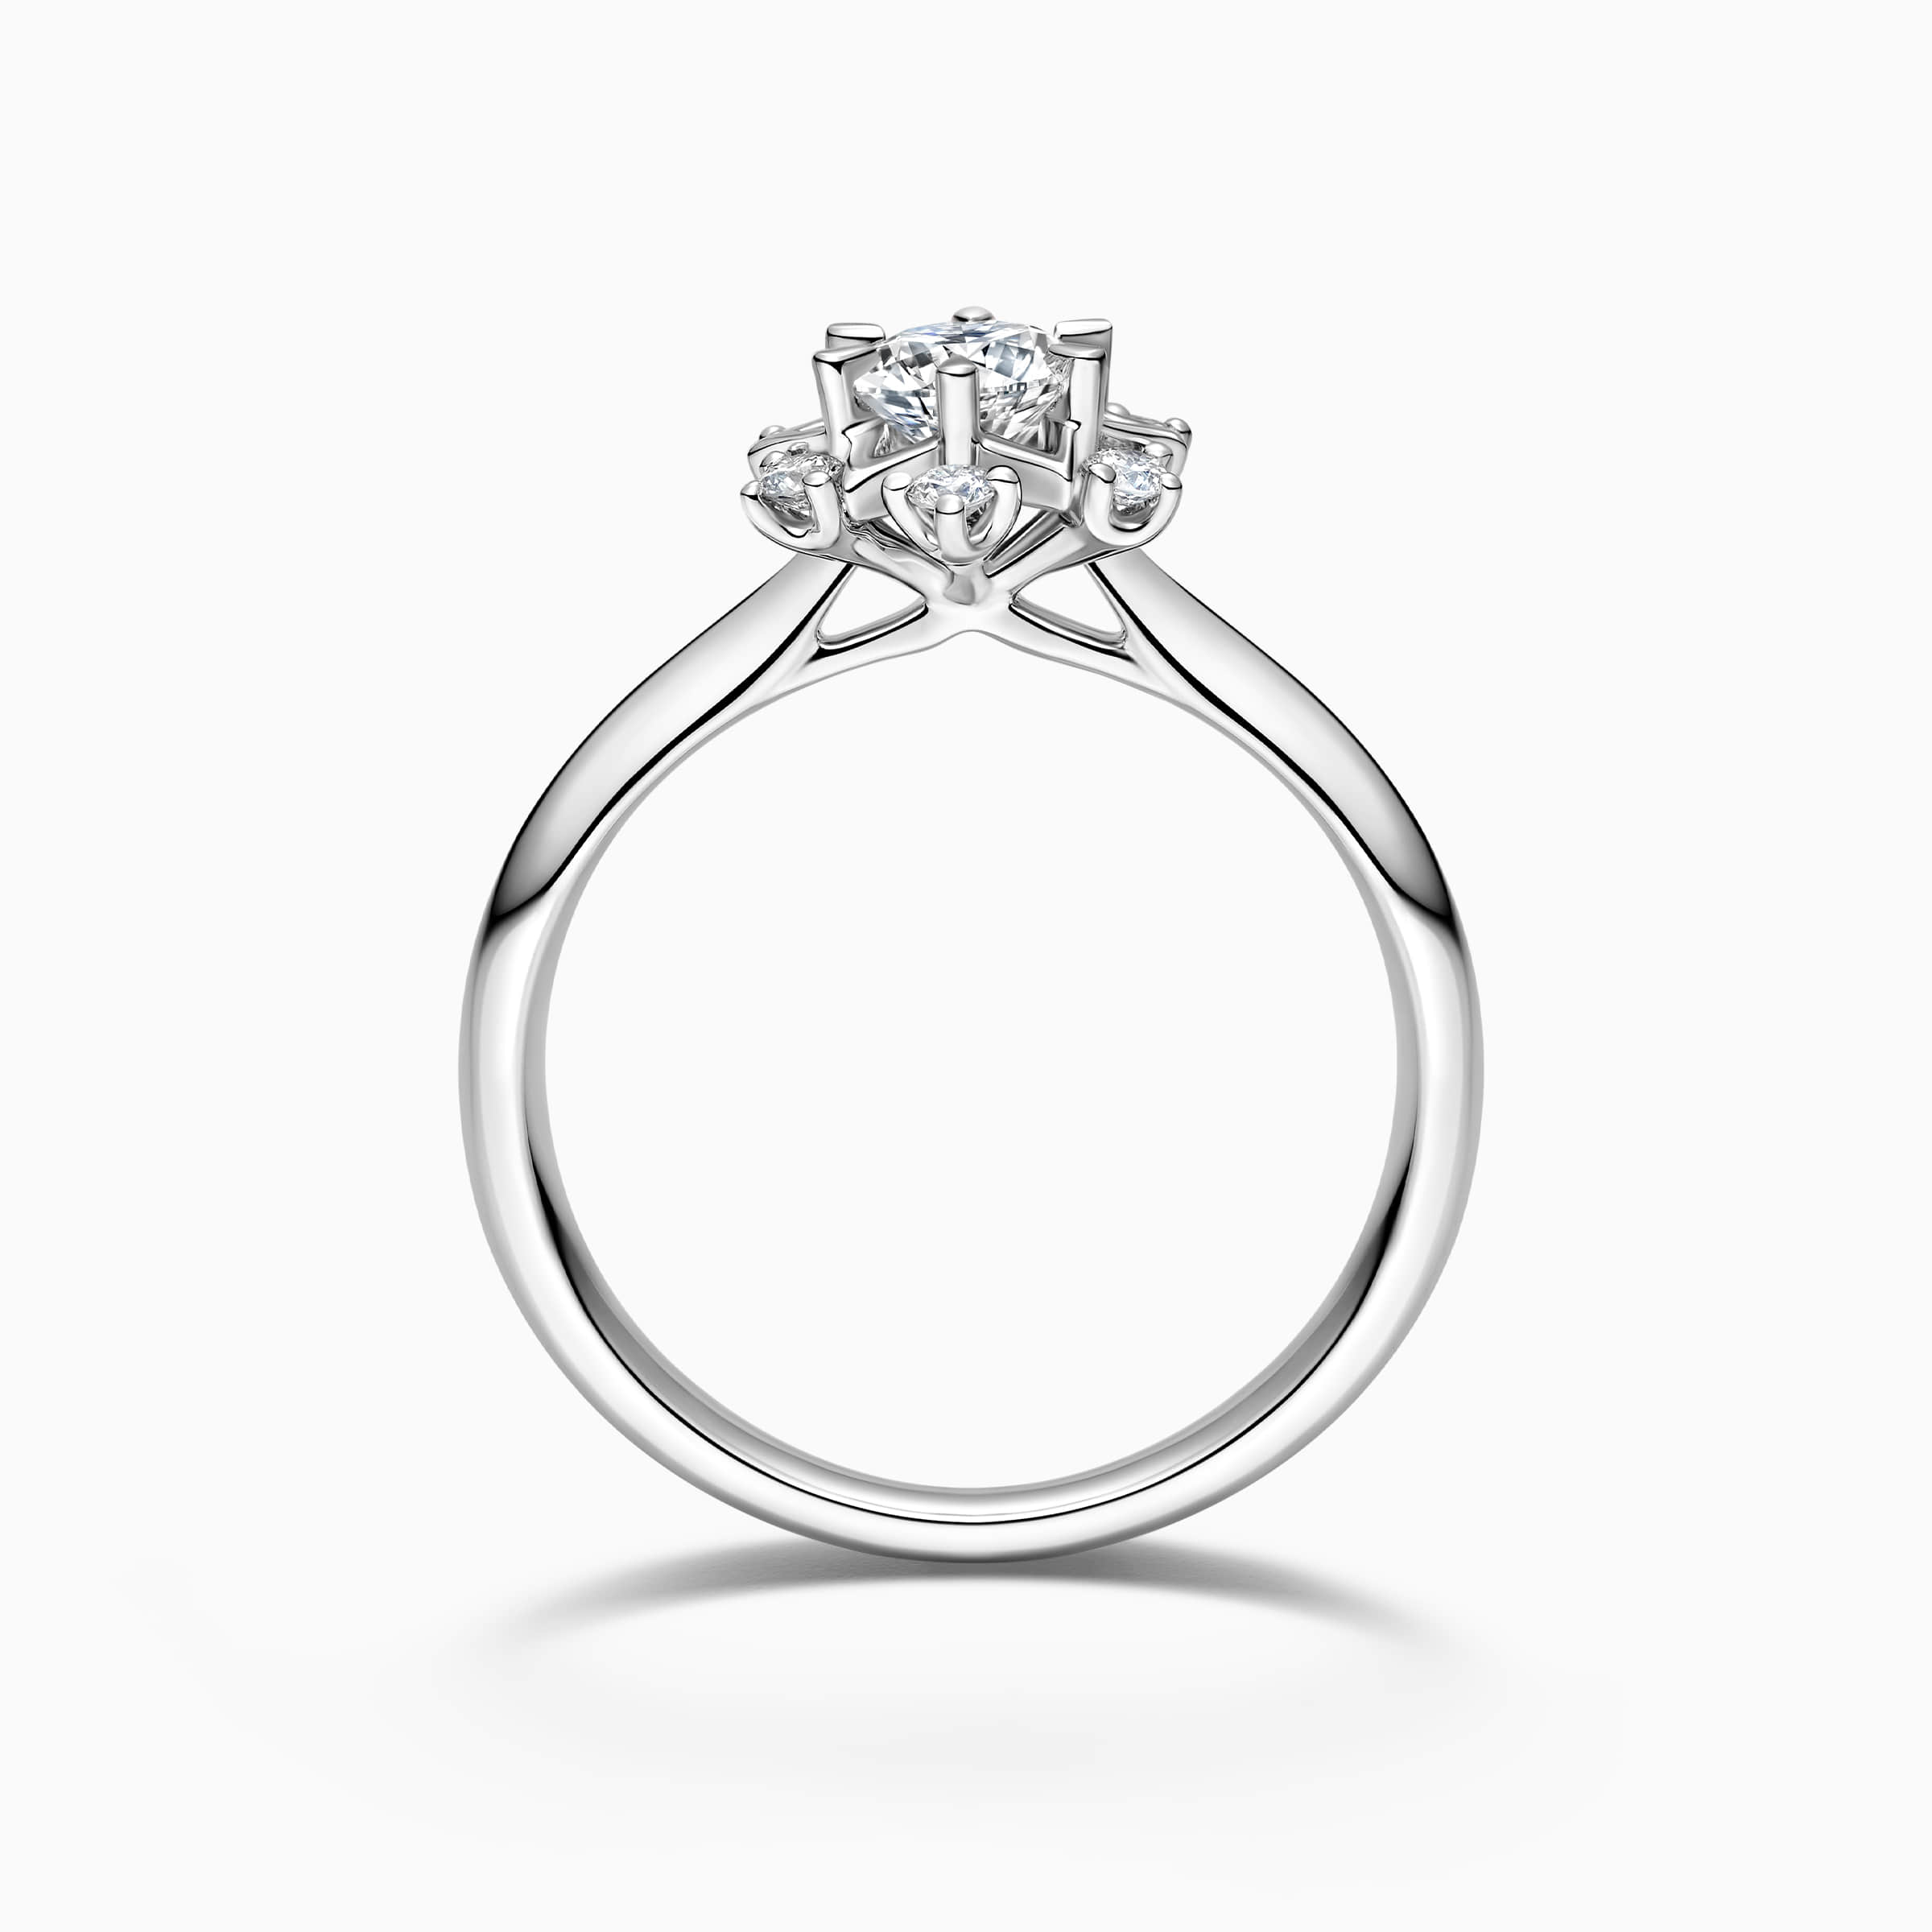 Darry Ring star engagement ring side view